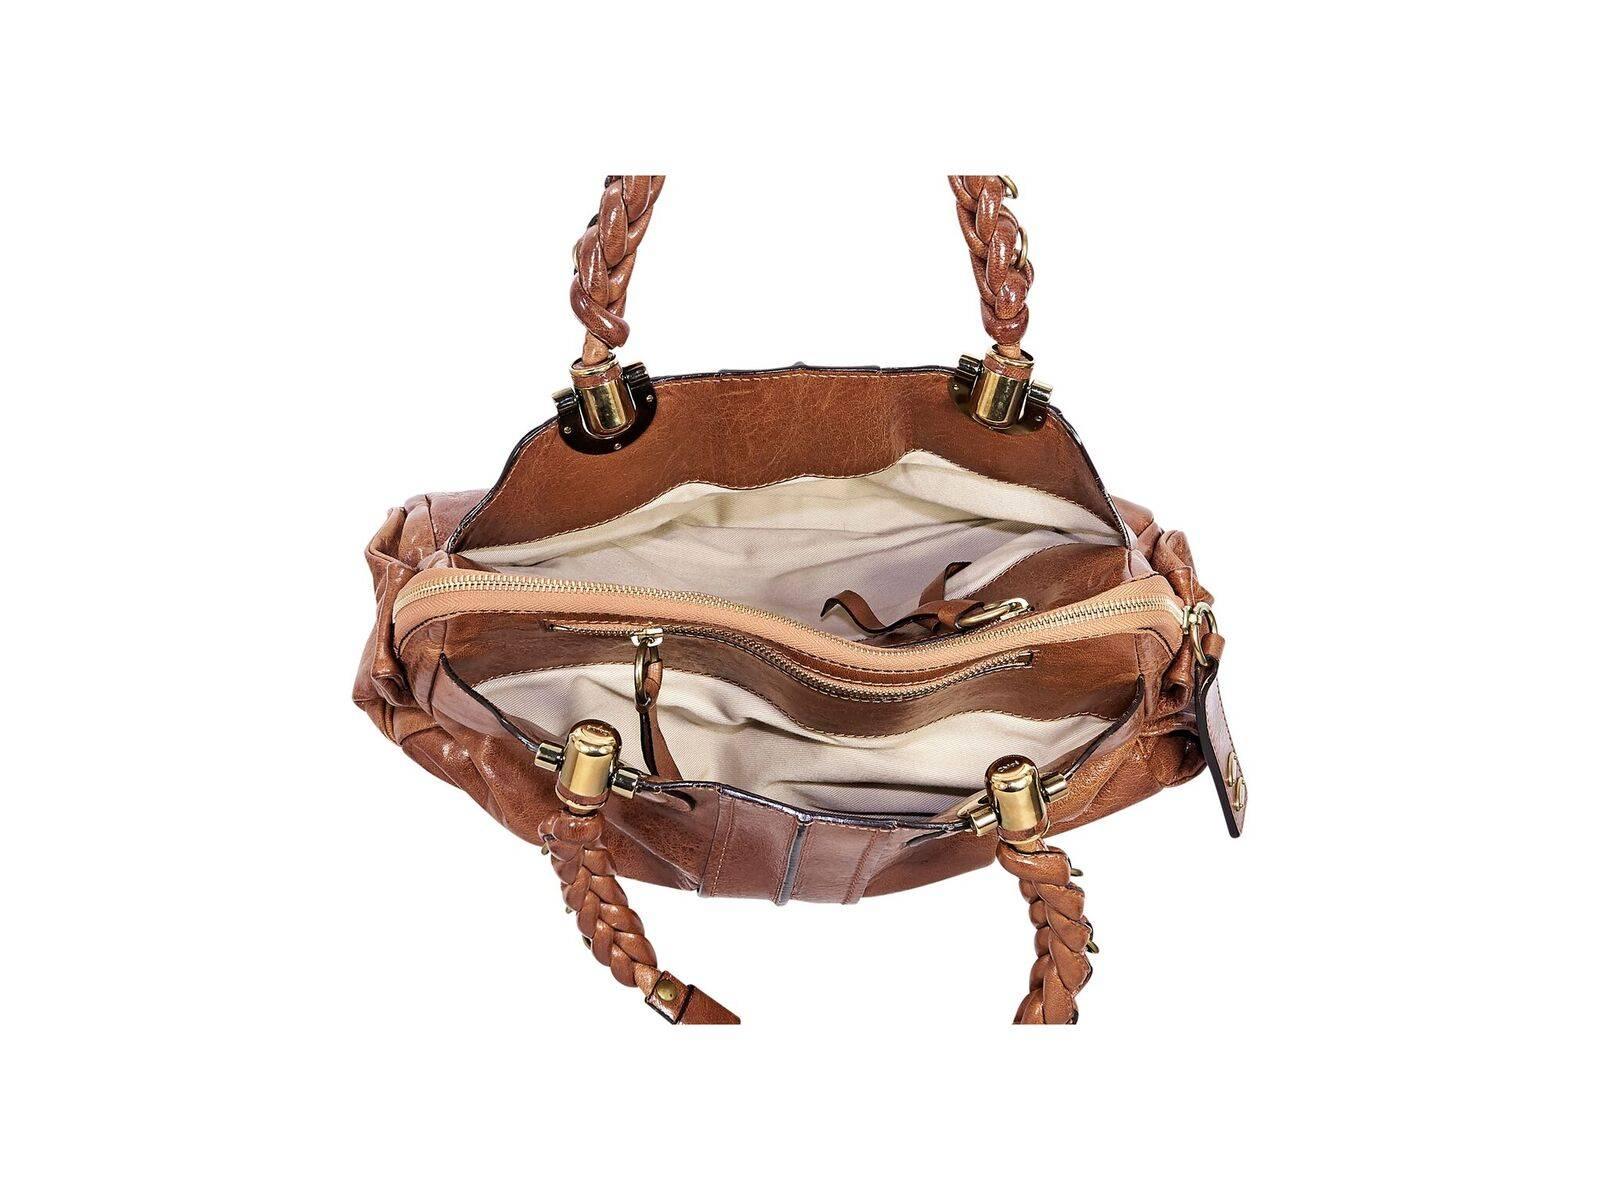 Product details:  Brown leather shoulder bag by Chloe.  Dual braided shoulder straps.  Two open compartments and center top zip close compartment.  Lined interior with inner zip and slide pockets.  Protective metal feet.  Goldtone hardware. 